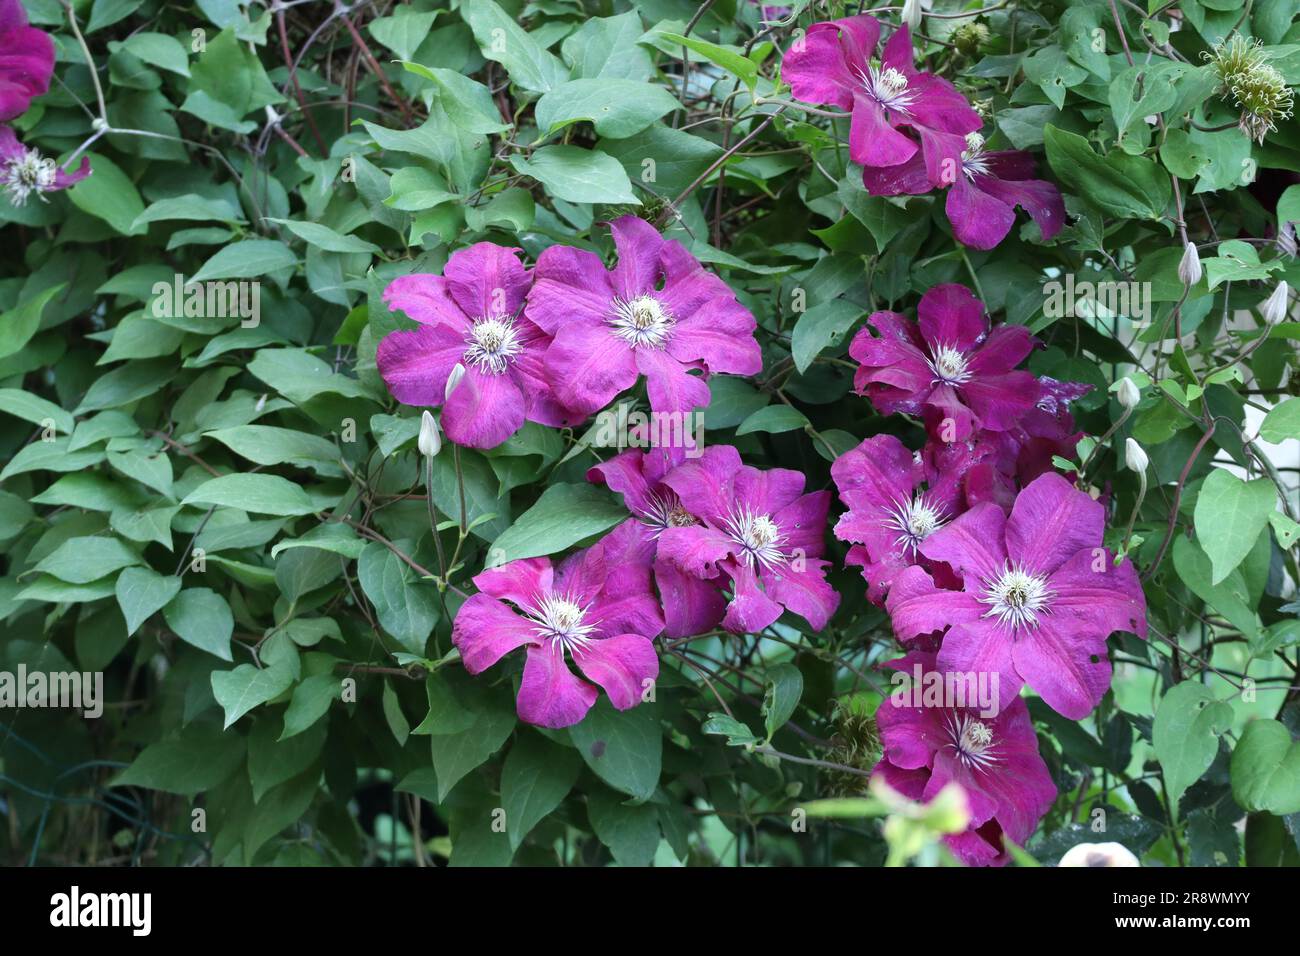 Flowers of Clematis viticella, the Italian leather flower Stock Photo